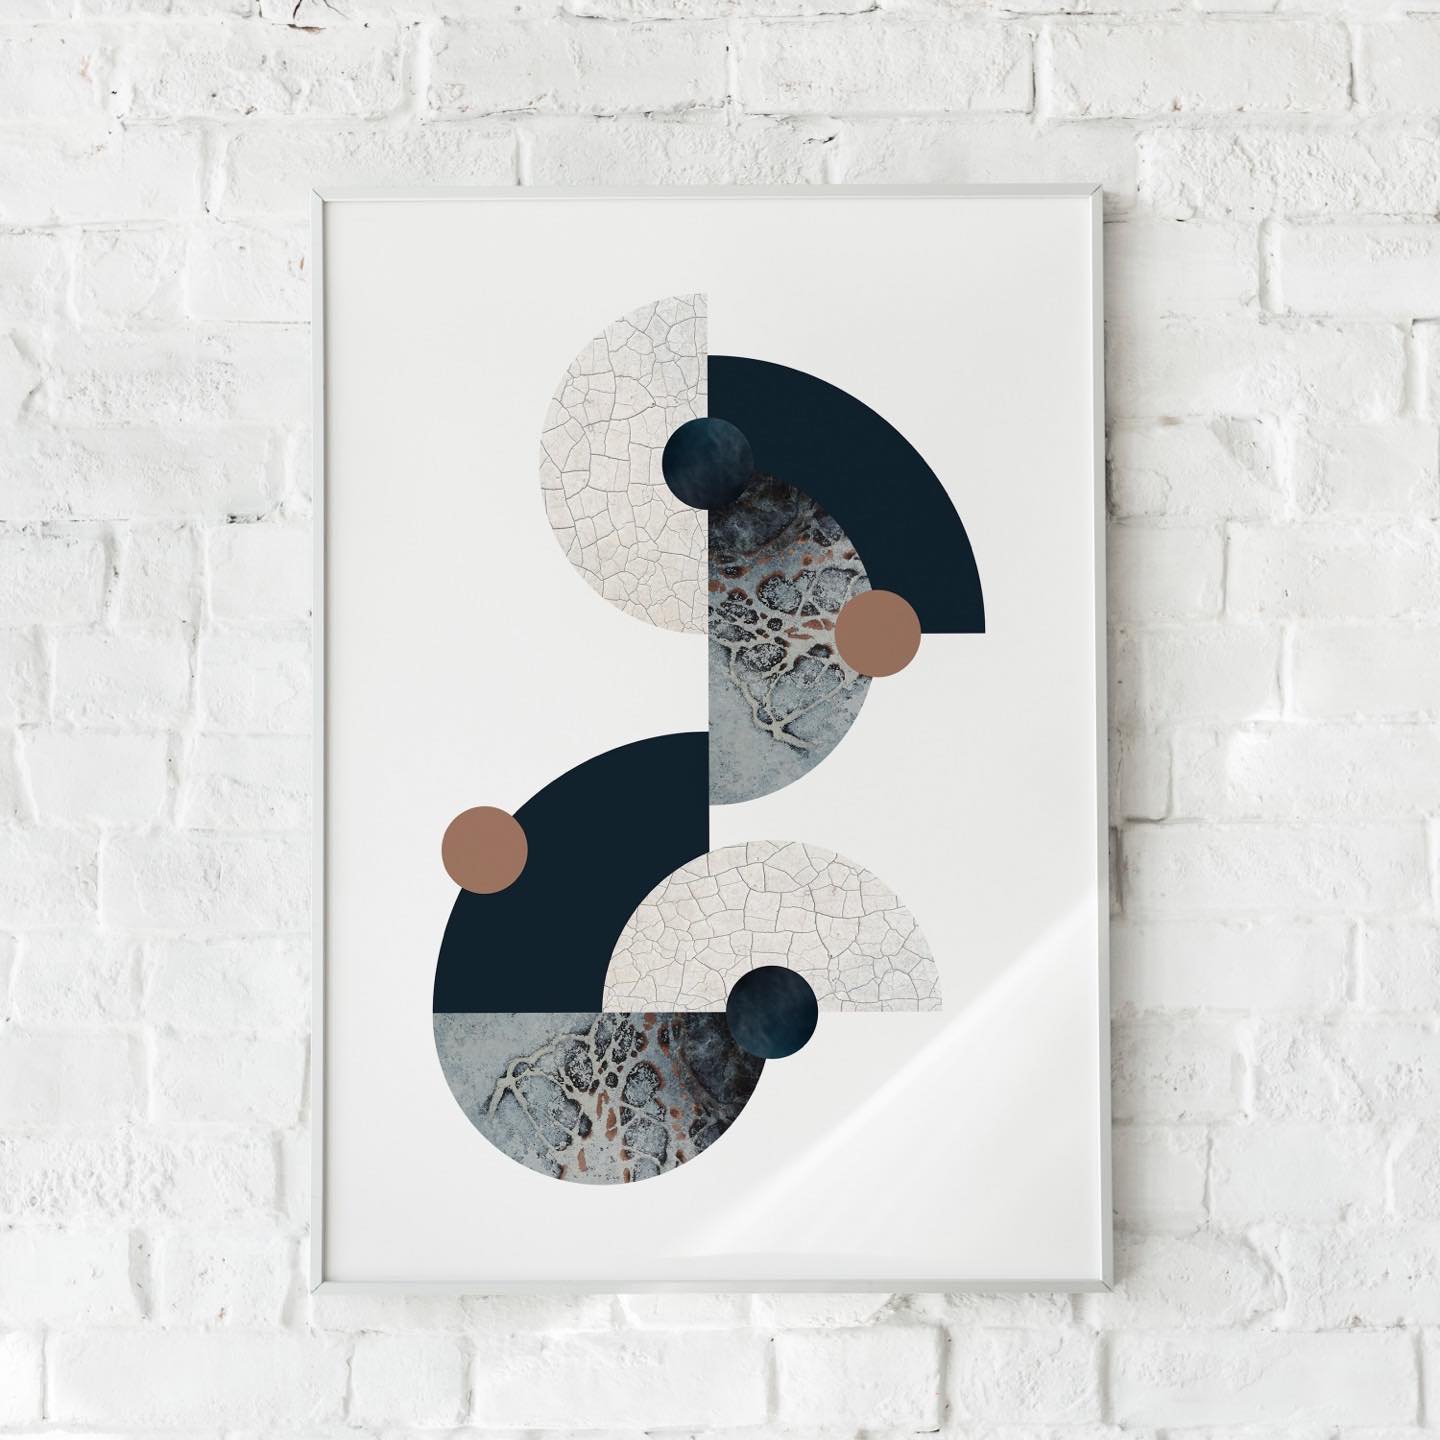 DEEP DOWN 

The Studio Fleia 'Deep down' series consisting of four art prints aim to help you remember that your environment is always mirroring you, so everything you don&rsquo;t like in your environment is just showing you that you need to go deep 